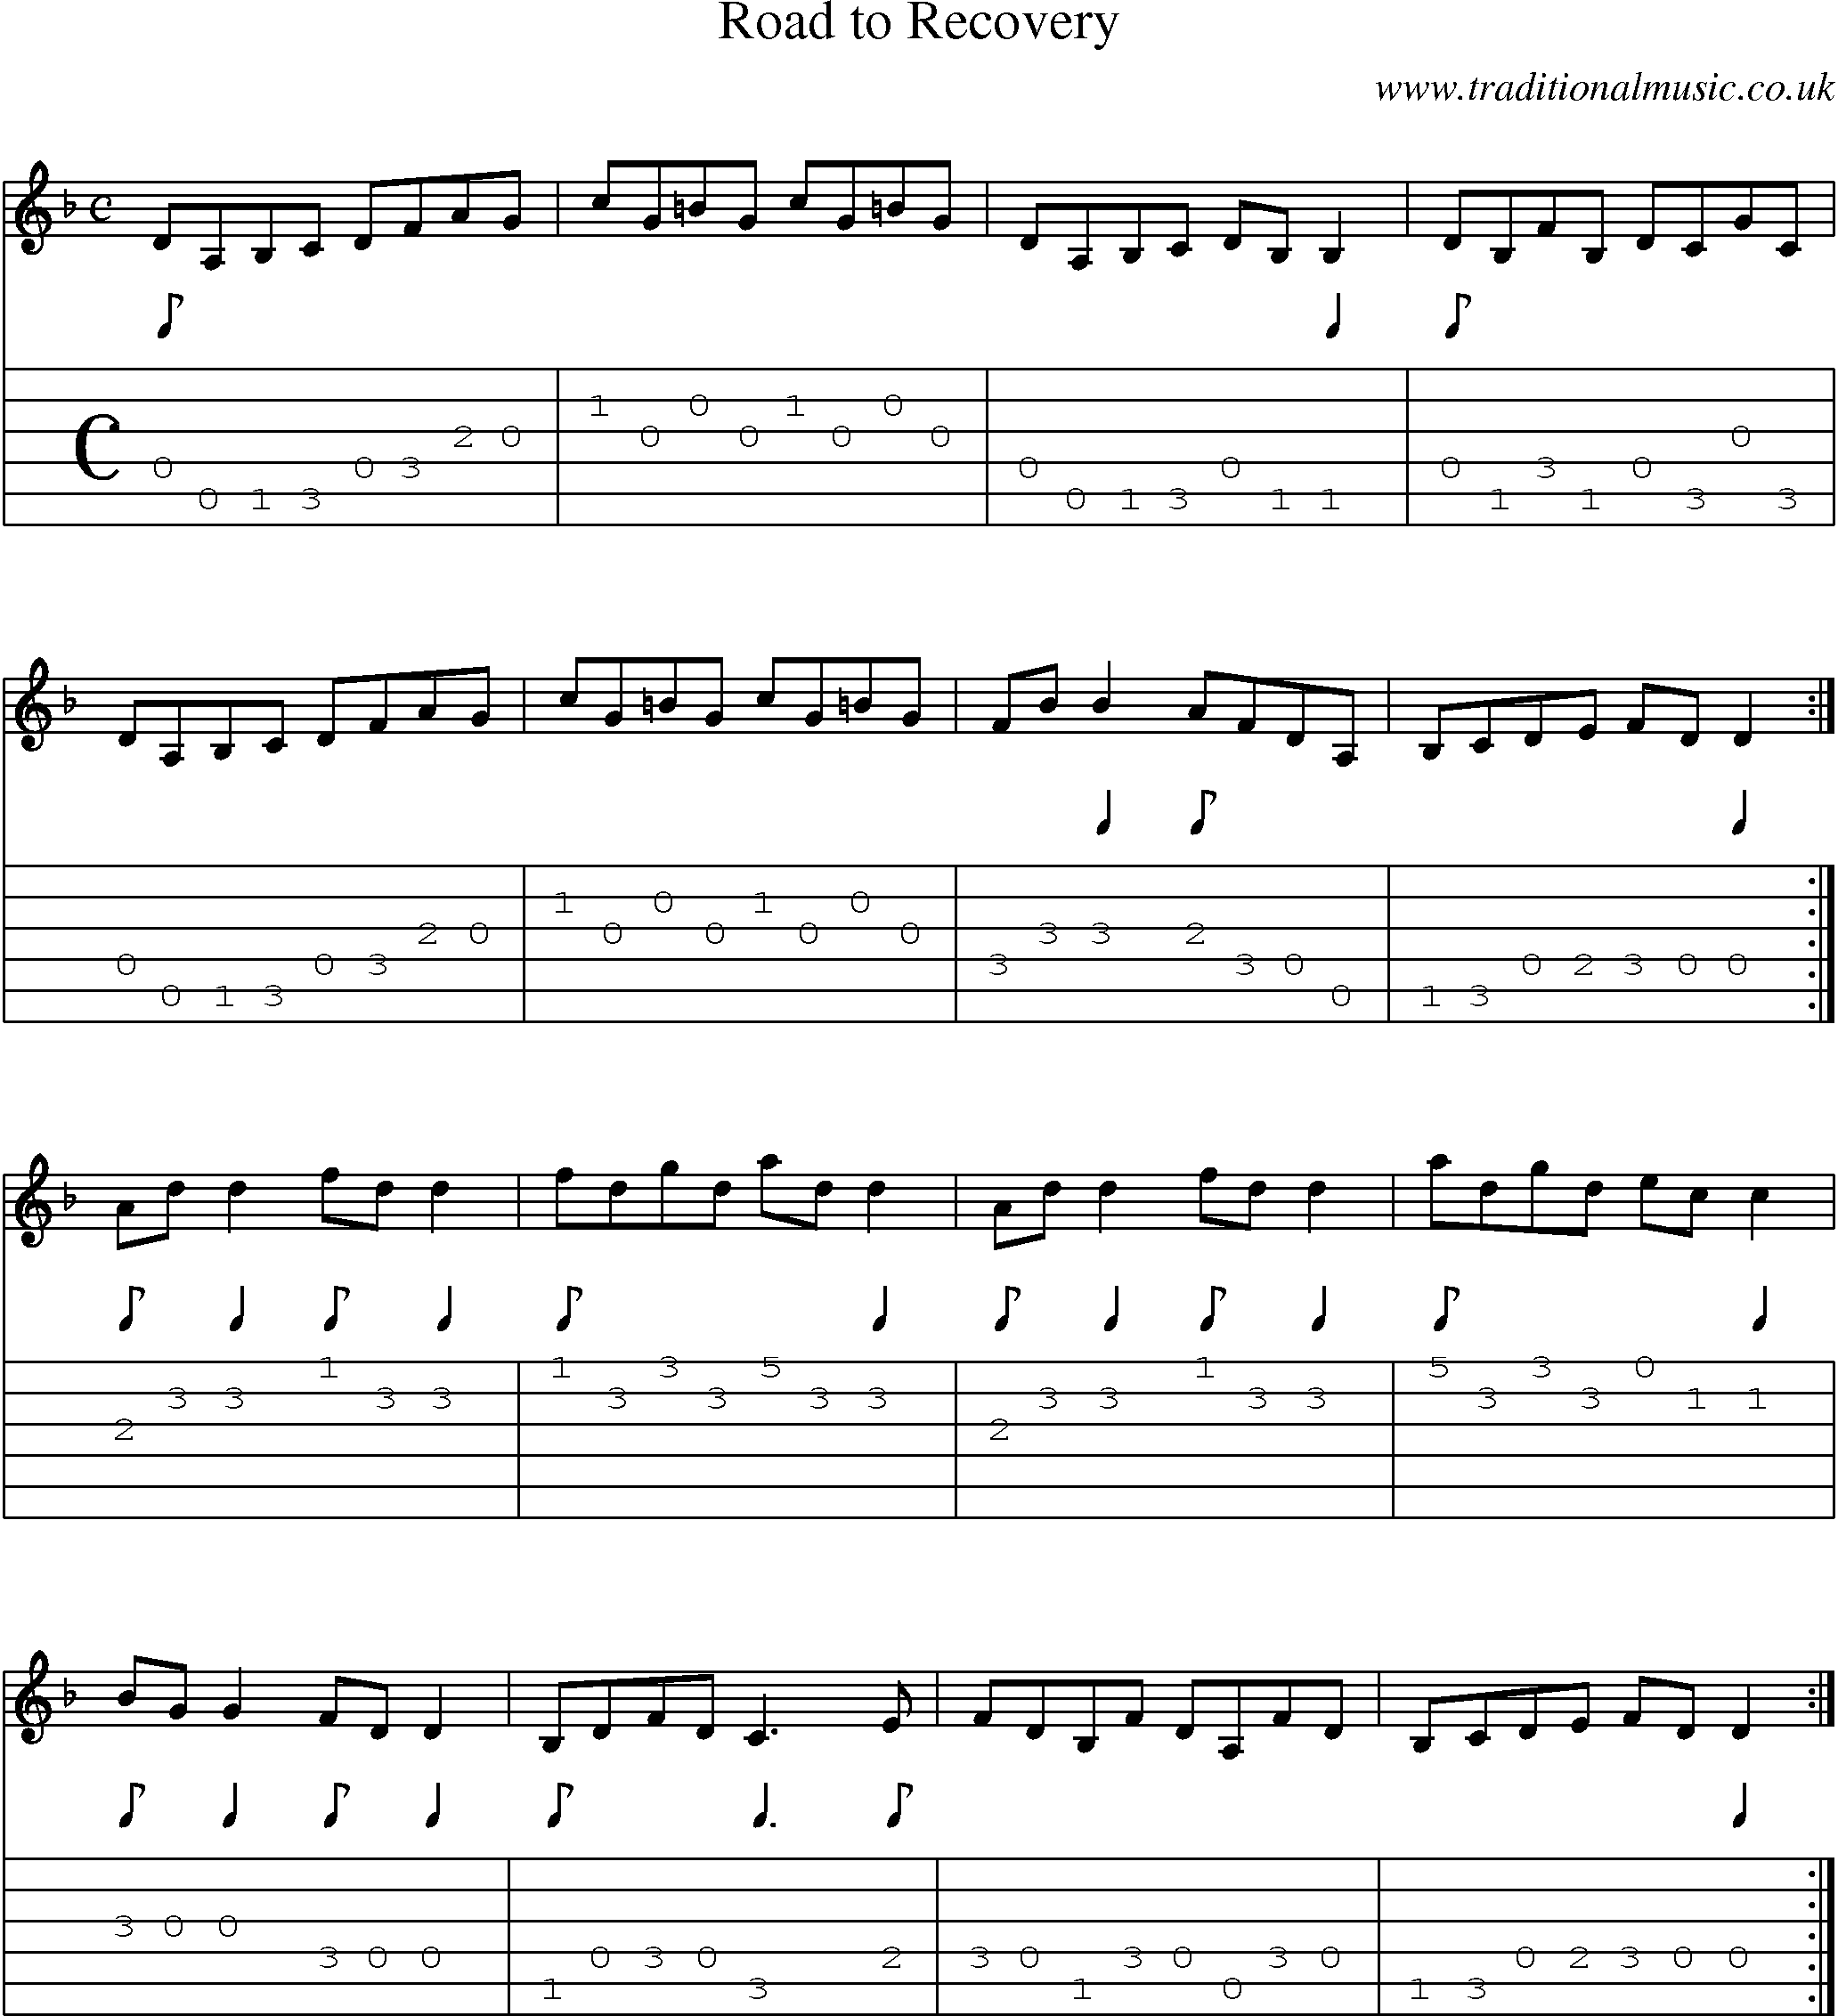 Music Score and Guitar Tabs for Road To Recovery